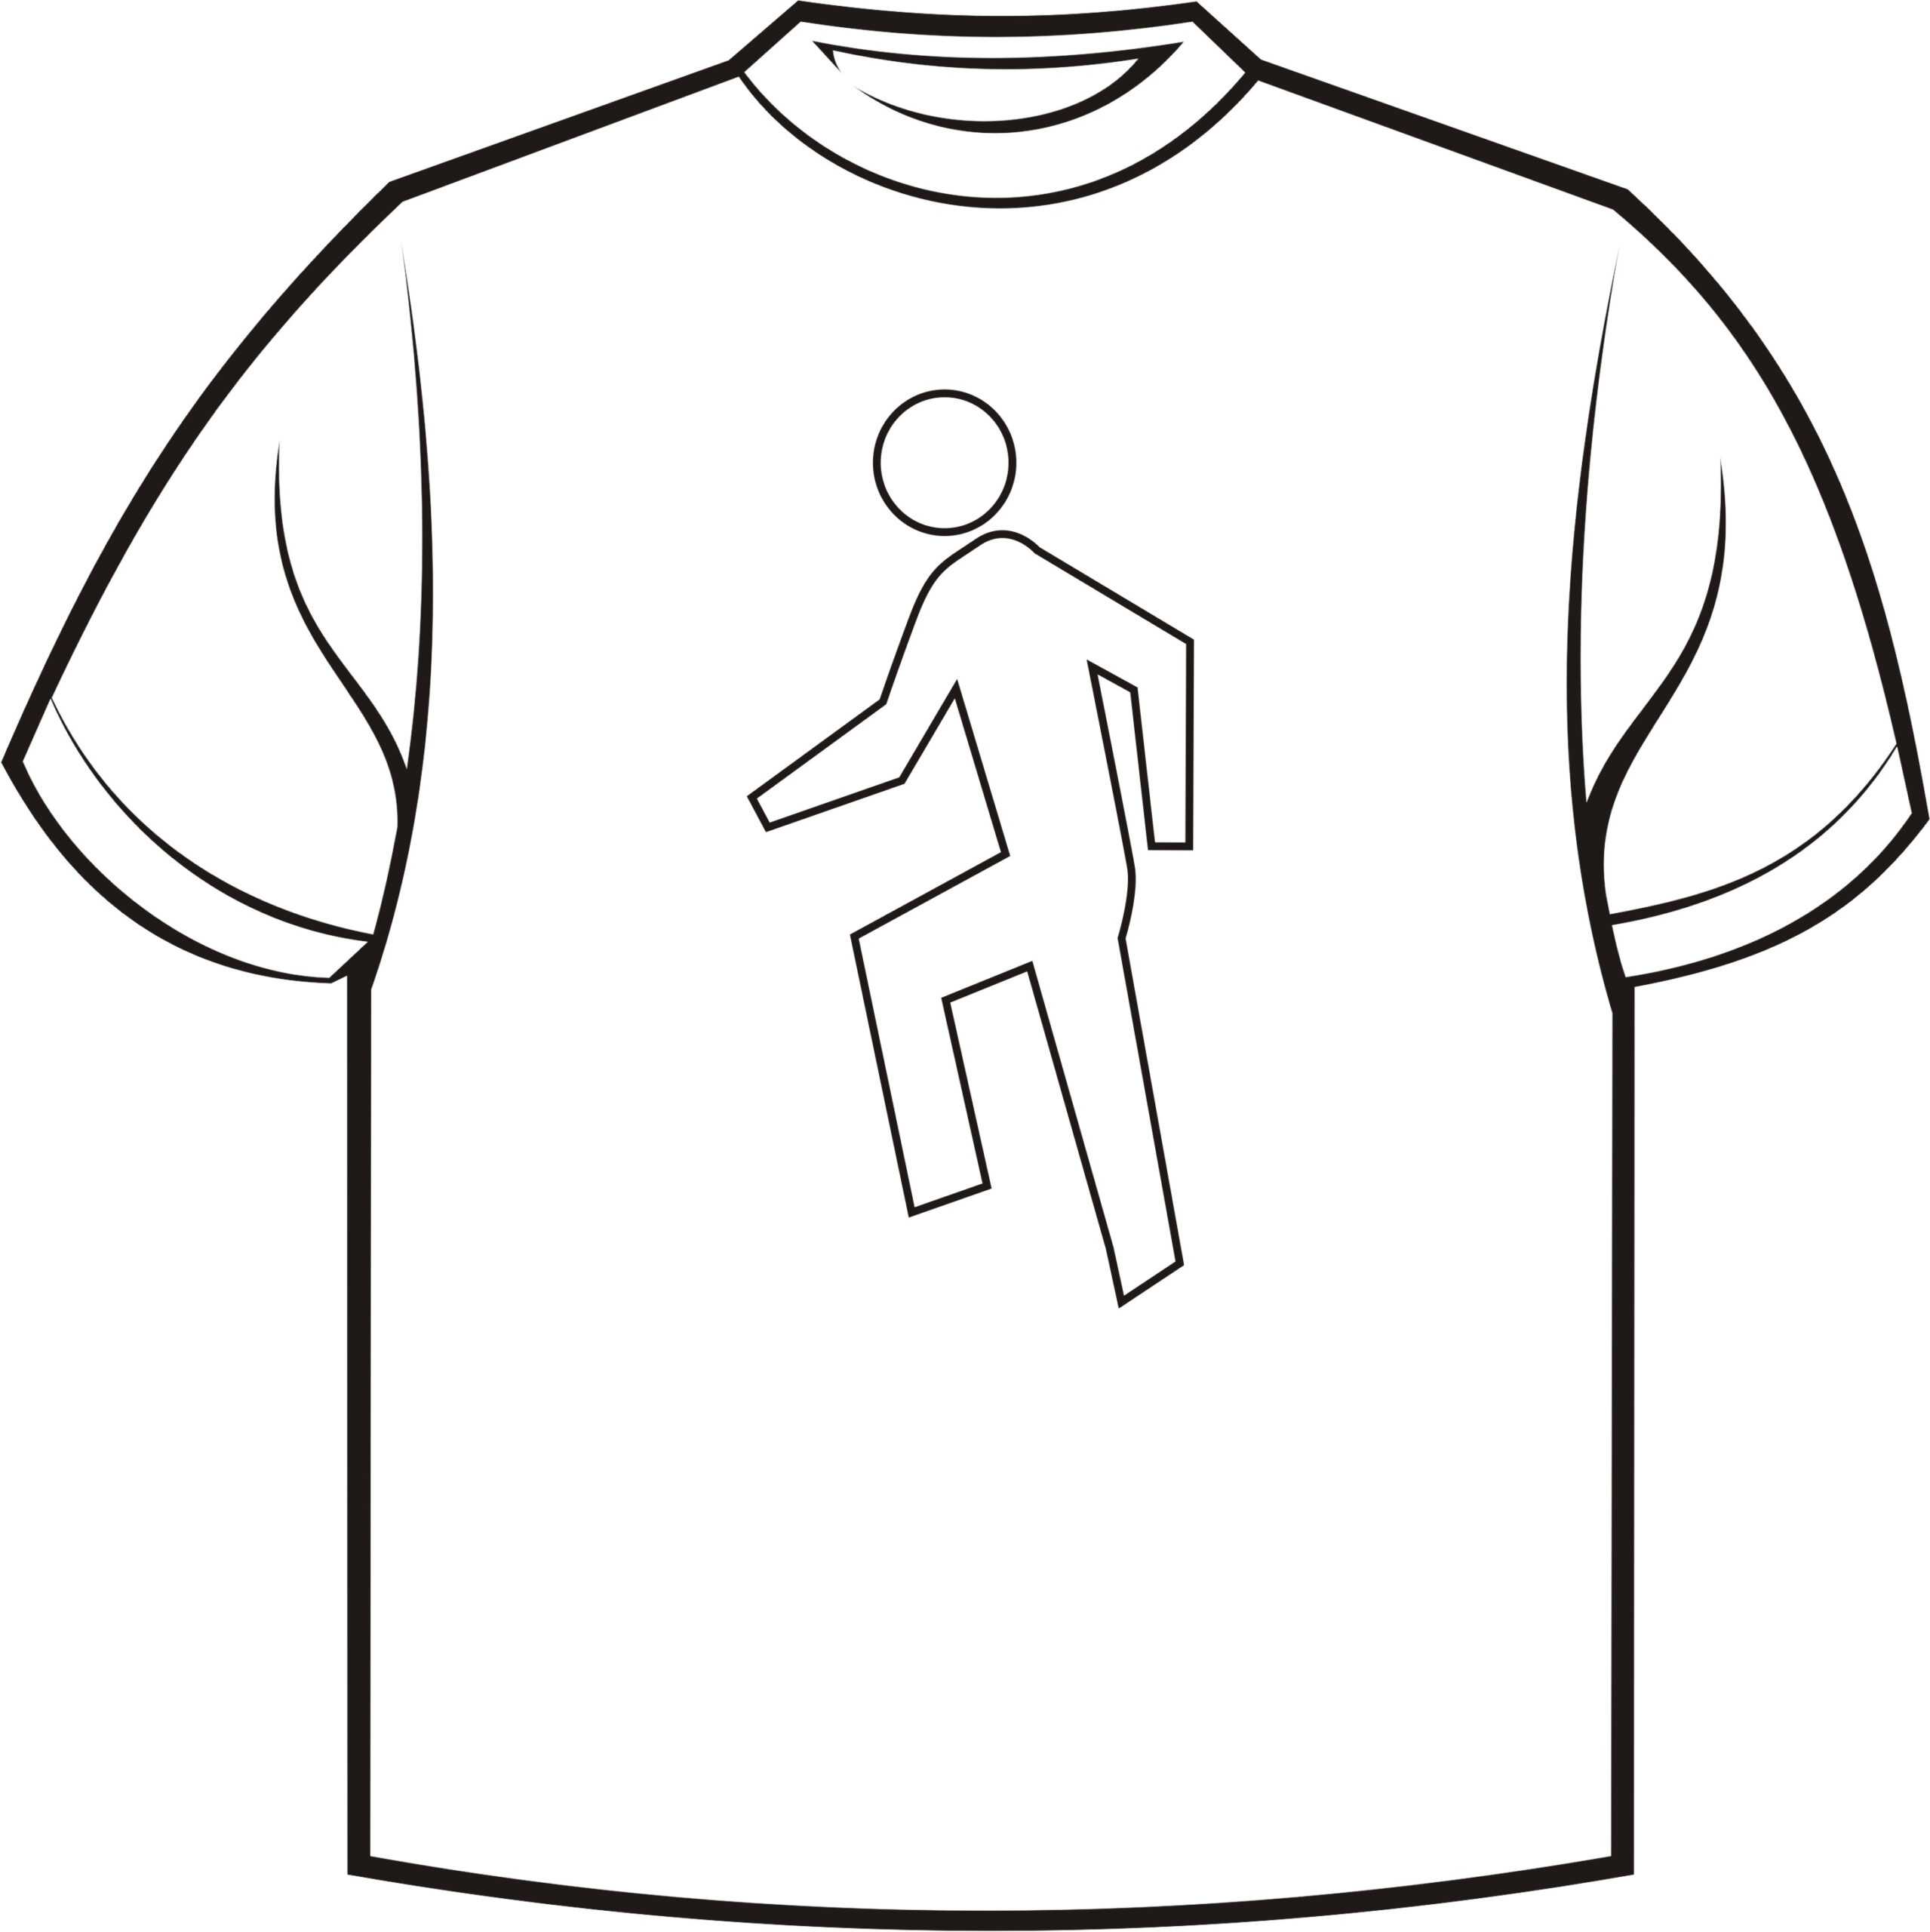 Free Blank T Shirt Outline, Download Free Clip Art, Free Intended For Blank T Shirt Outline Template